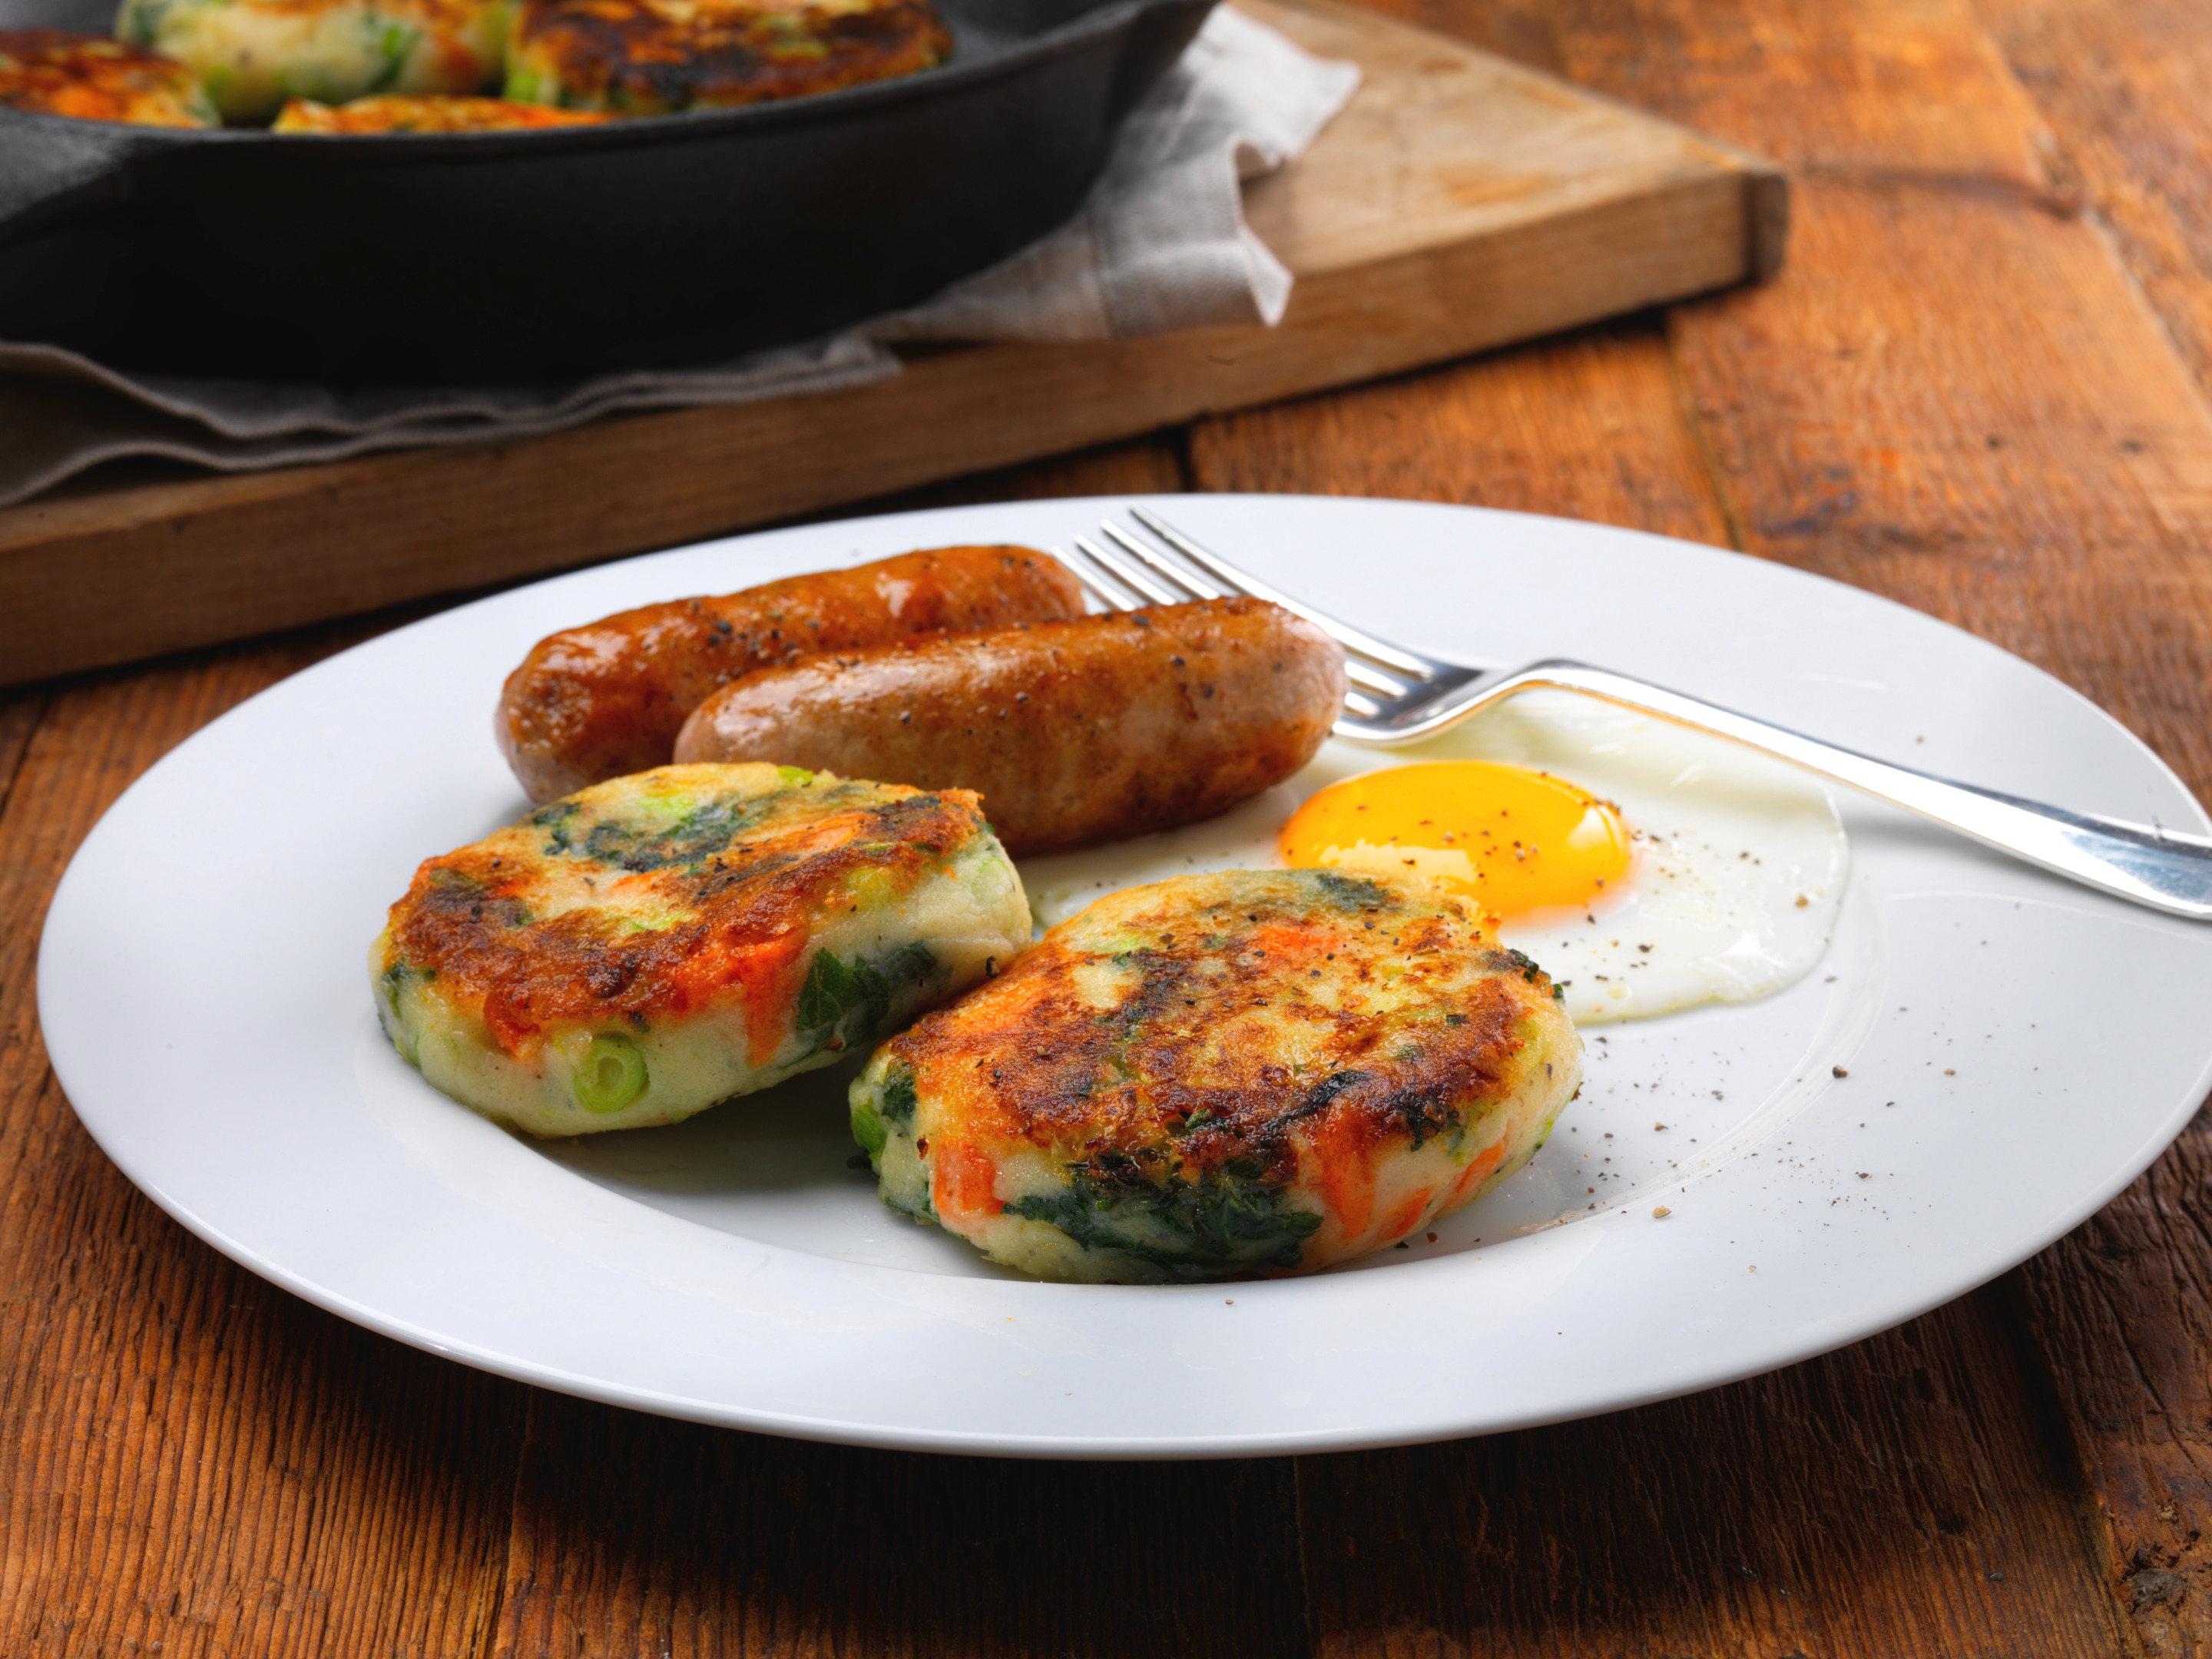 A plate of Bubble and squeak which is a traditional English dish made with the shallow-fried leftover vegetables, grilled sausages and a half cooked egg is placed in a dish on a wooden surface.